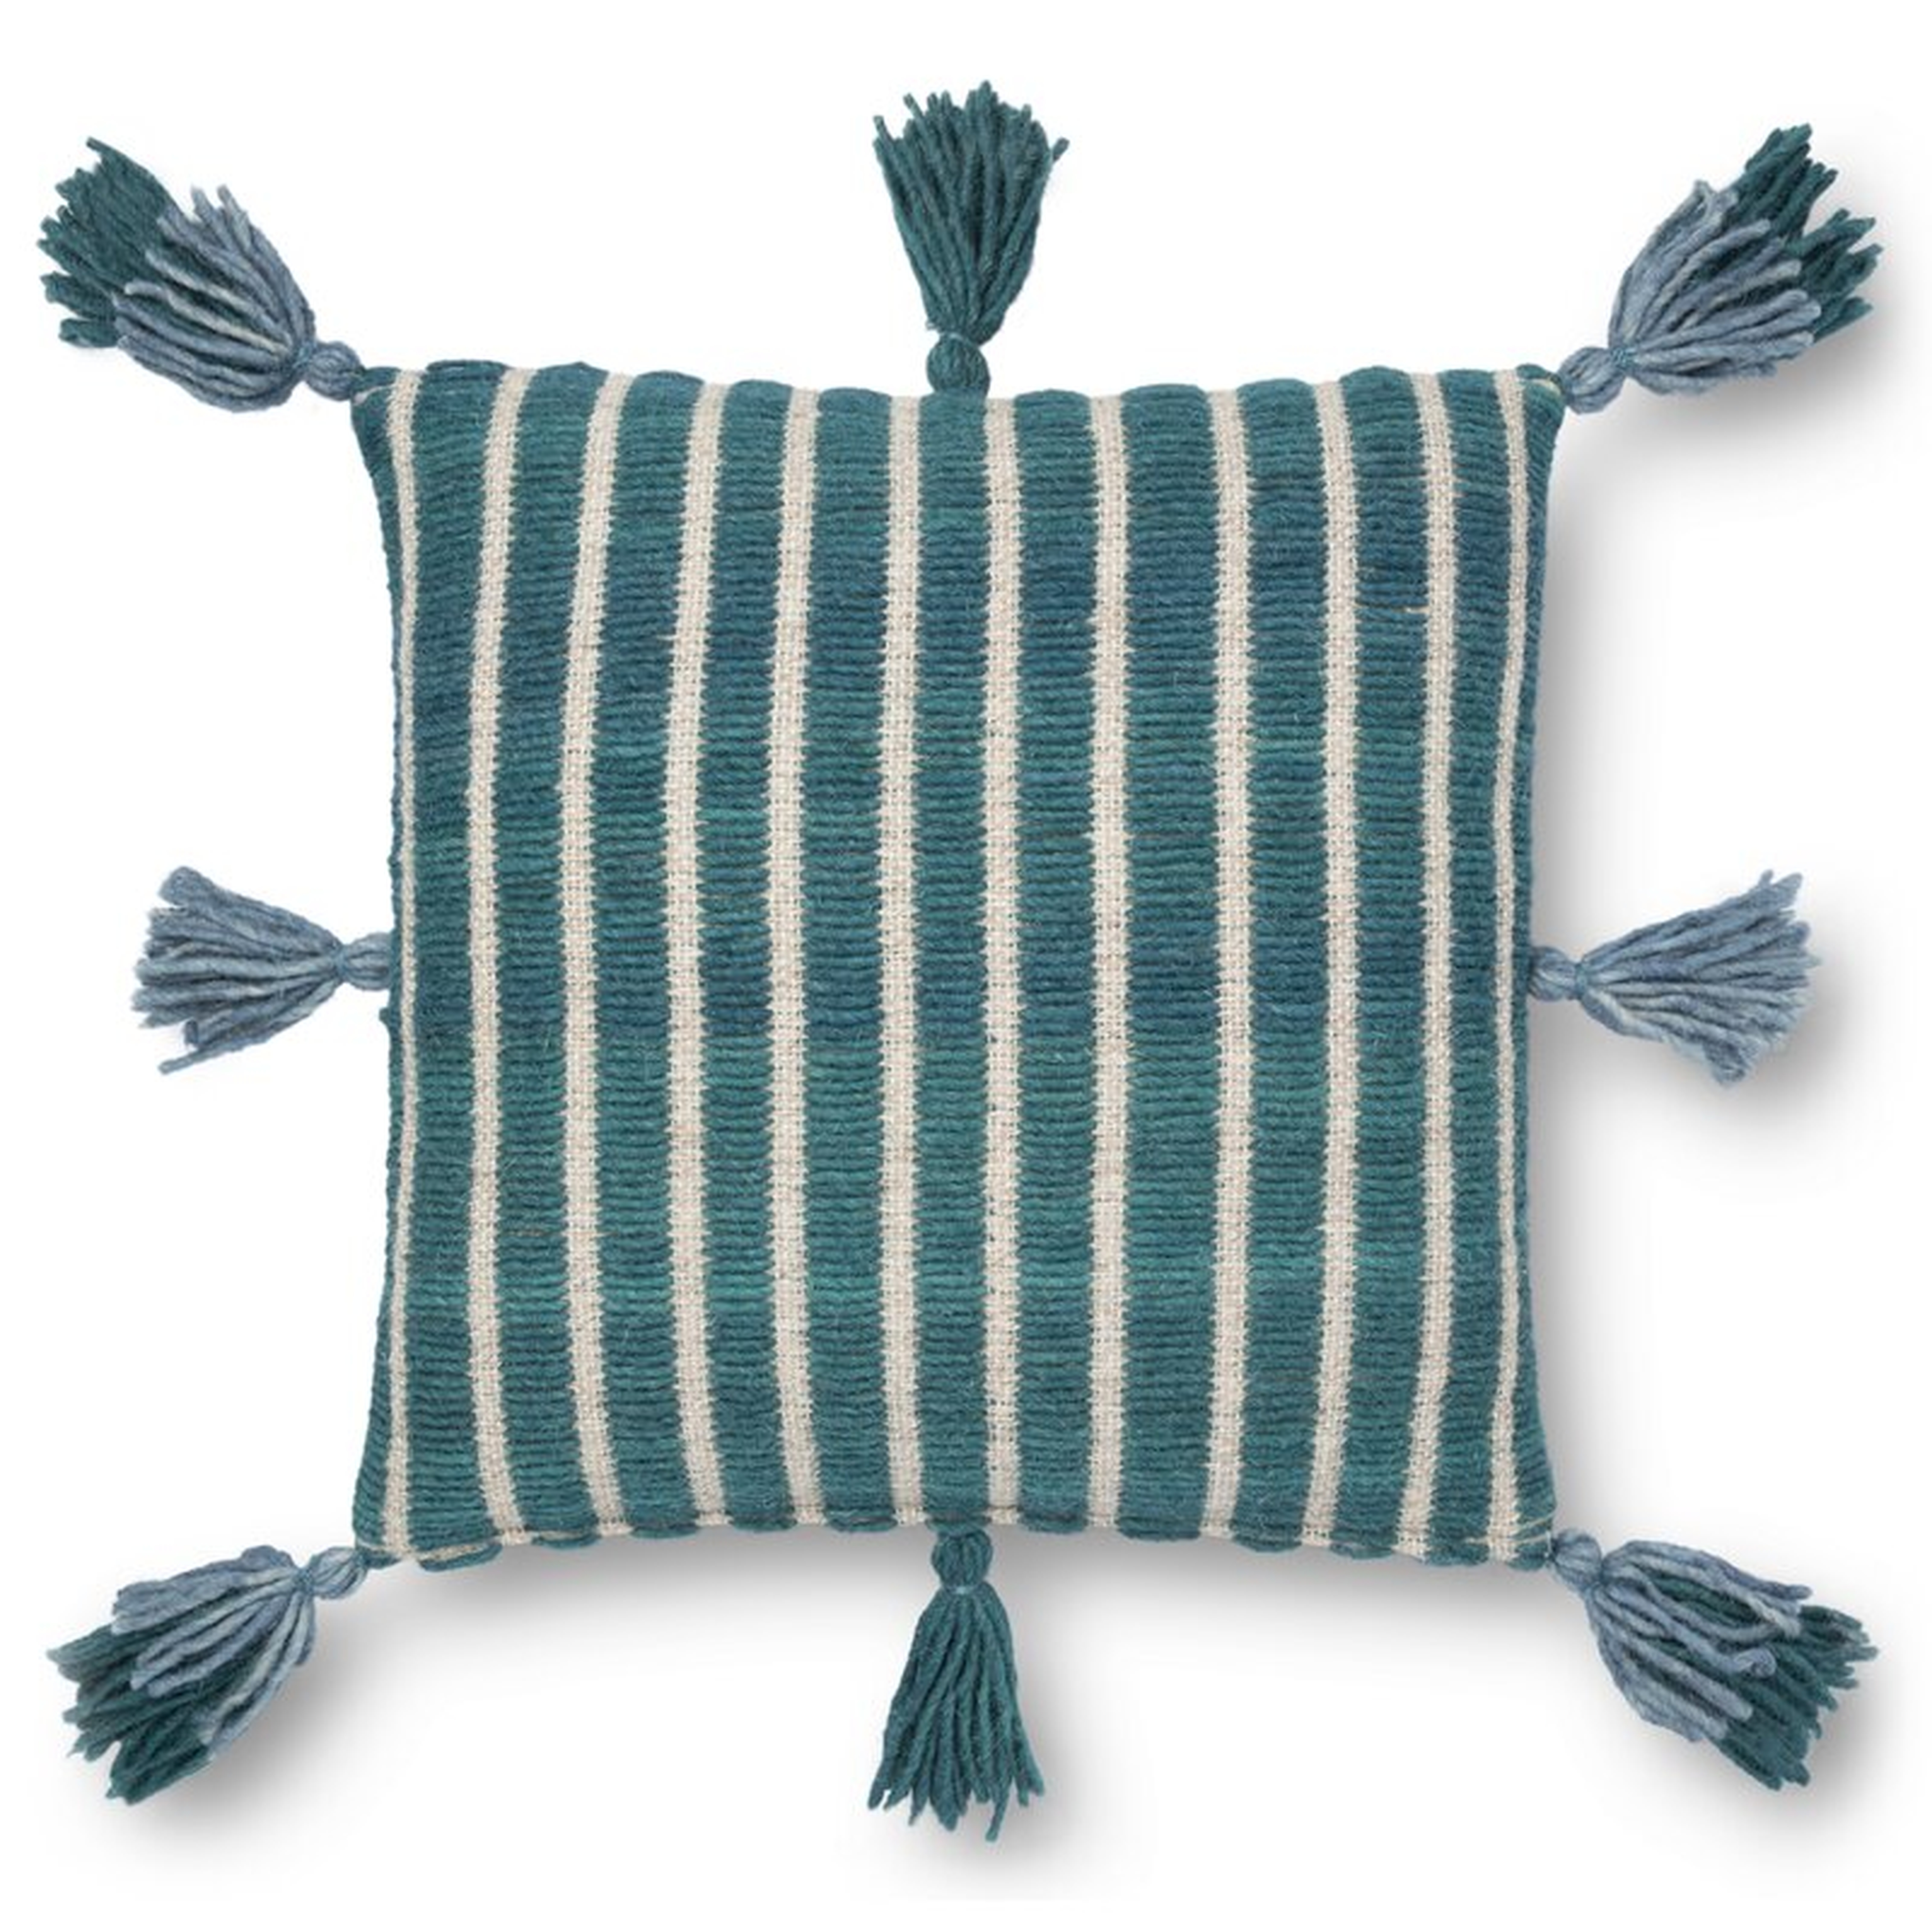 Striped Throw Pillow Fill Material: Polyester/Polyfill, Color: Blue/Teal, Size: 18" x 18" - Perigold